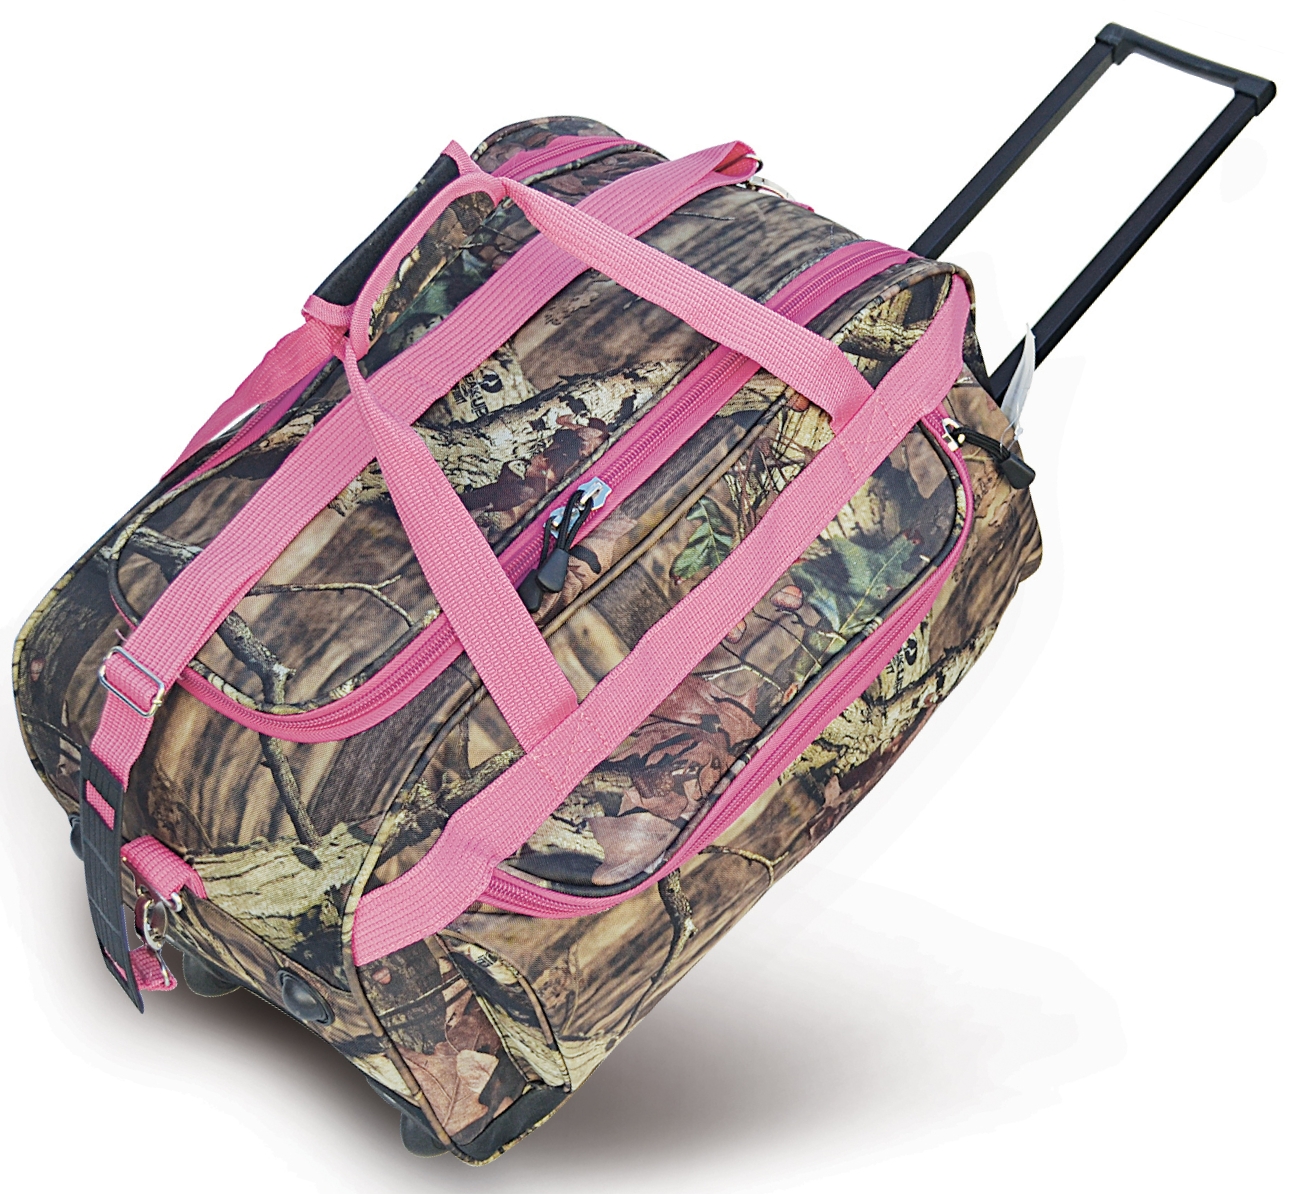 Explorer Duffle ON Wheels with two wheels, hard board, pulling handles, front two pockets Black, Pink Camo Mossy Oak 22 inch 30 inch